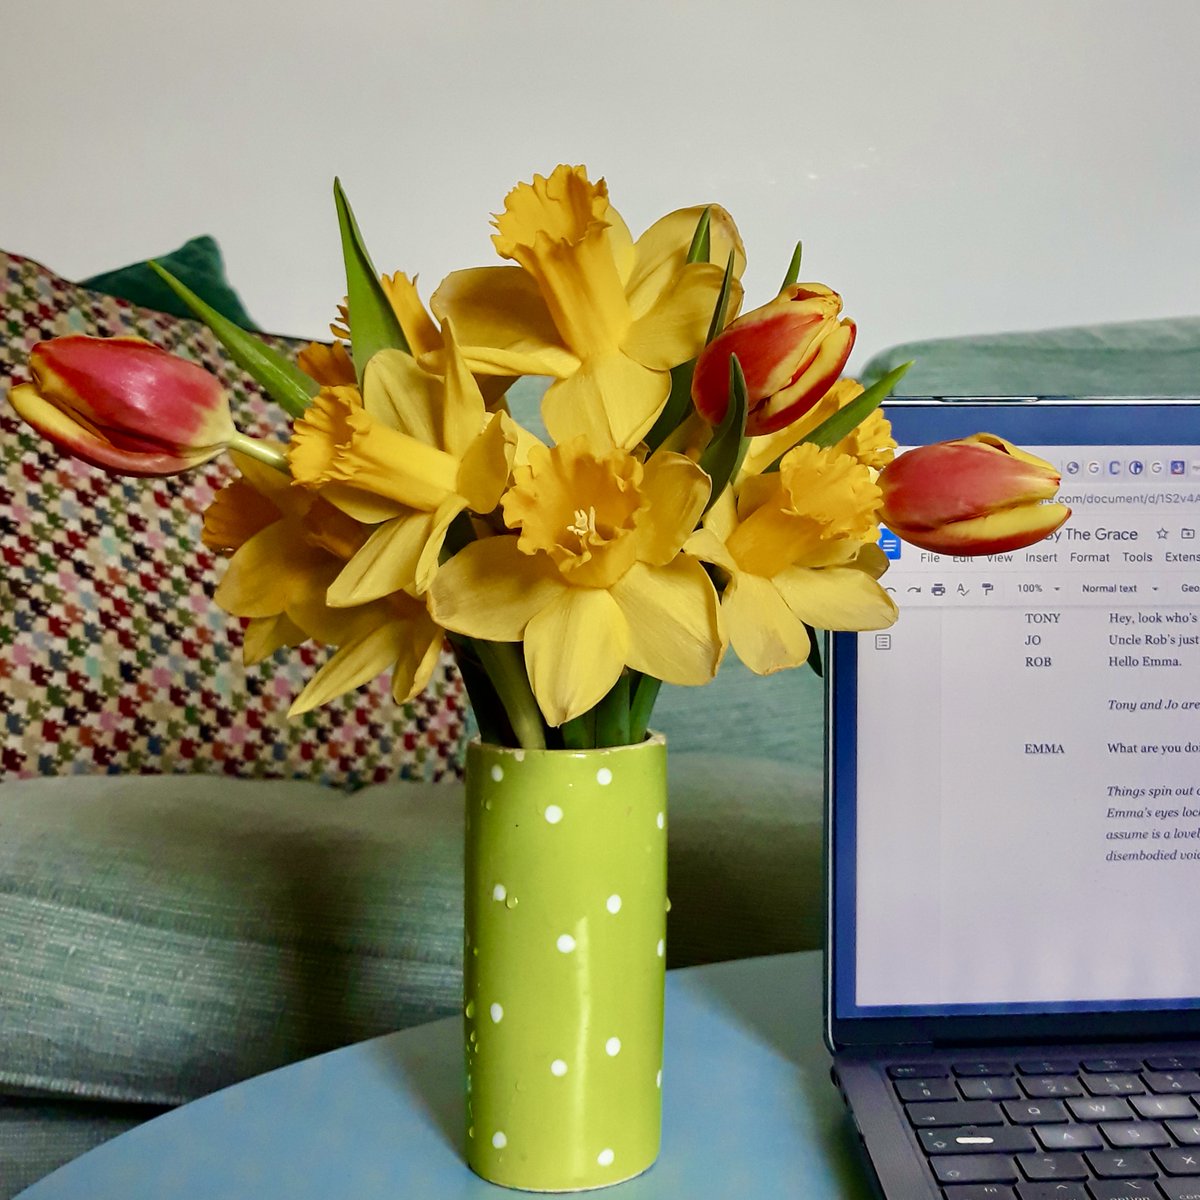 Nothing like a little promise of Spring when you're winter-writing!
#womenwriting #writerslife #womenplaywrights #joy #womensvoices #wearehere #halfthesky #welshwriters #welsh #writers
@PrimadonnaFest @ShermanTheatre